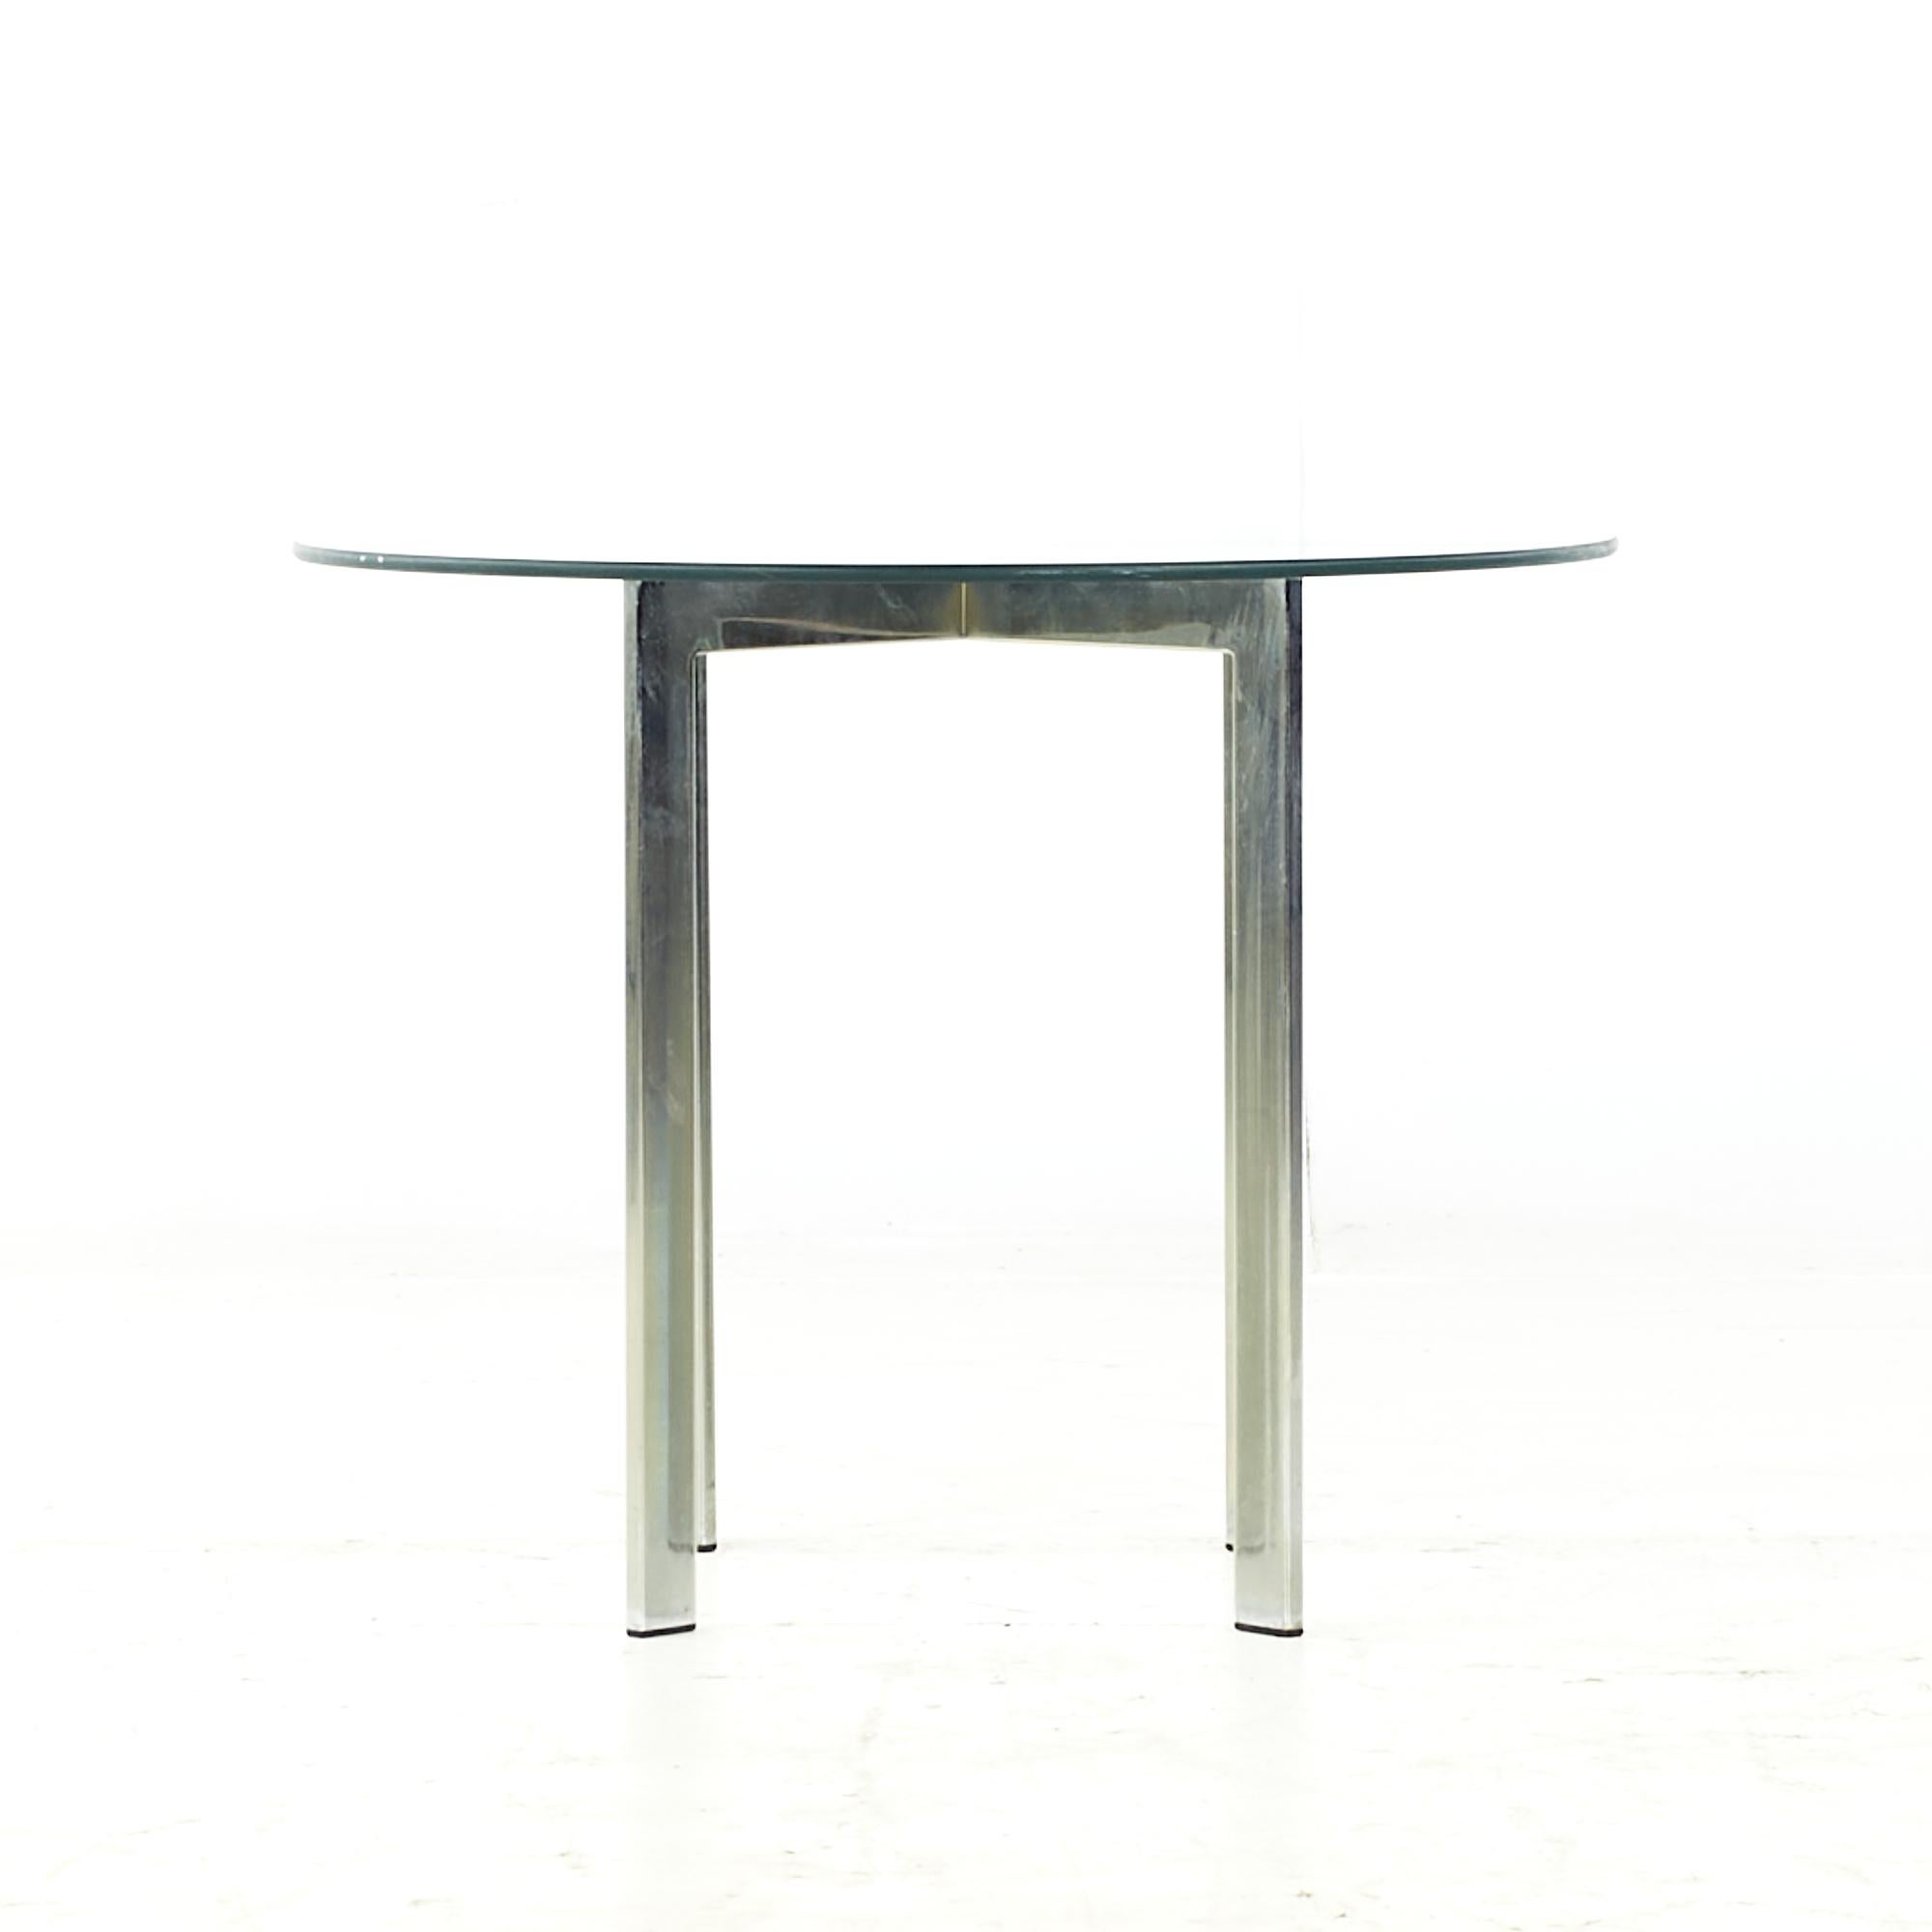 Pace Collection Style midcentury Chrome and glass side table.

This side table measures: 26 wide x 26 deep x 20.75 inches high

All pieces of furniture can be had in what we call restored vintage condition. That means the piece is restored upon